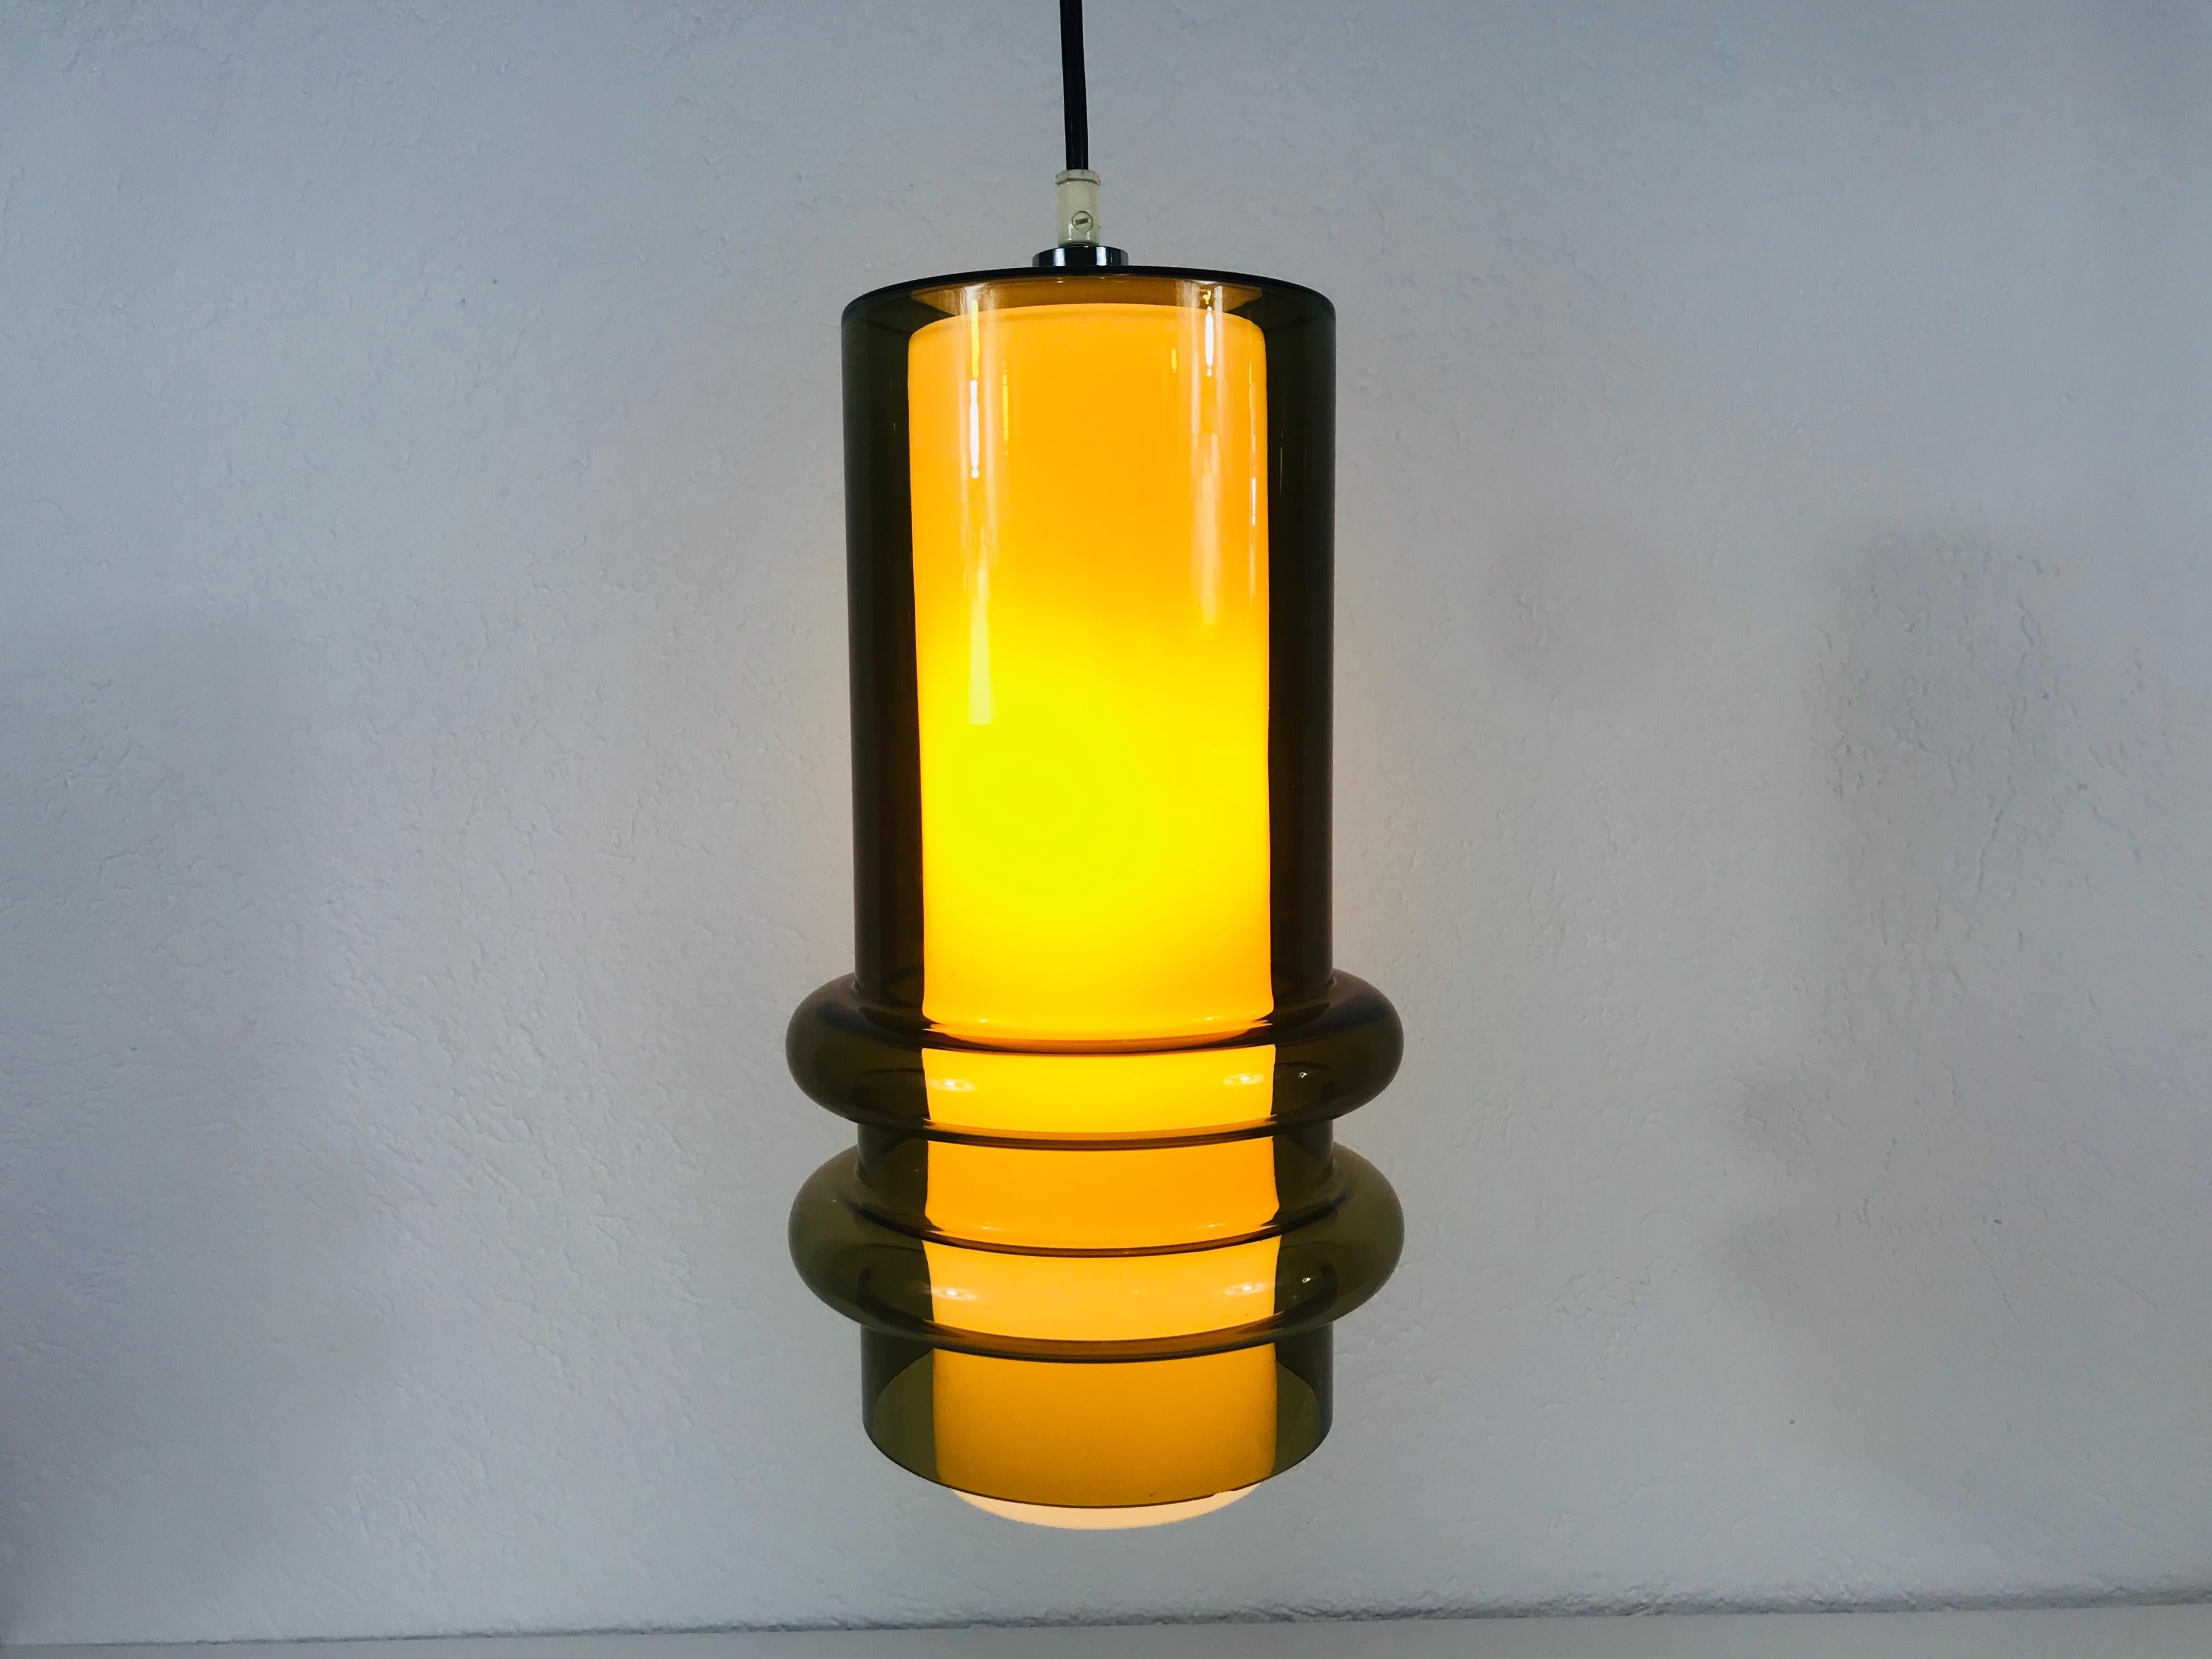 Very rare glass pendant lamp by Tapio Wirkkala. It has two glass shades, one white glass shade in the amber glass shade.

Height of shade: 37 cm 

Max Height: 100 cm 

The fixture requires one E27 light bulb.